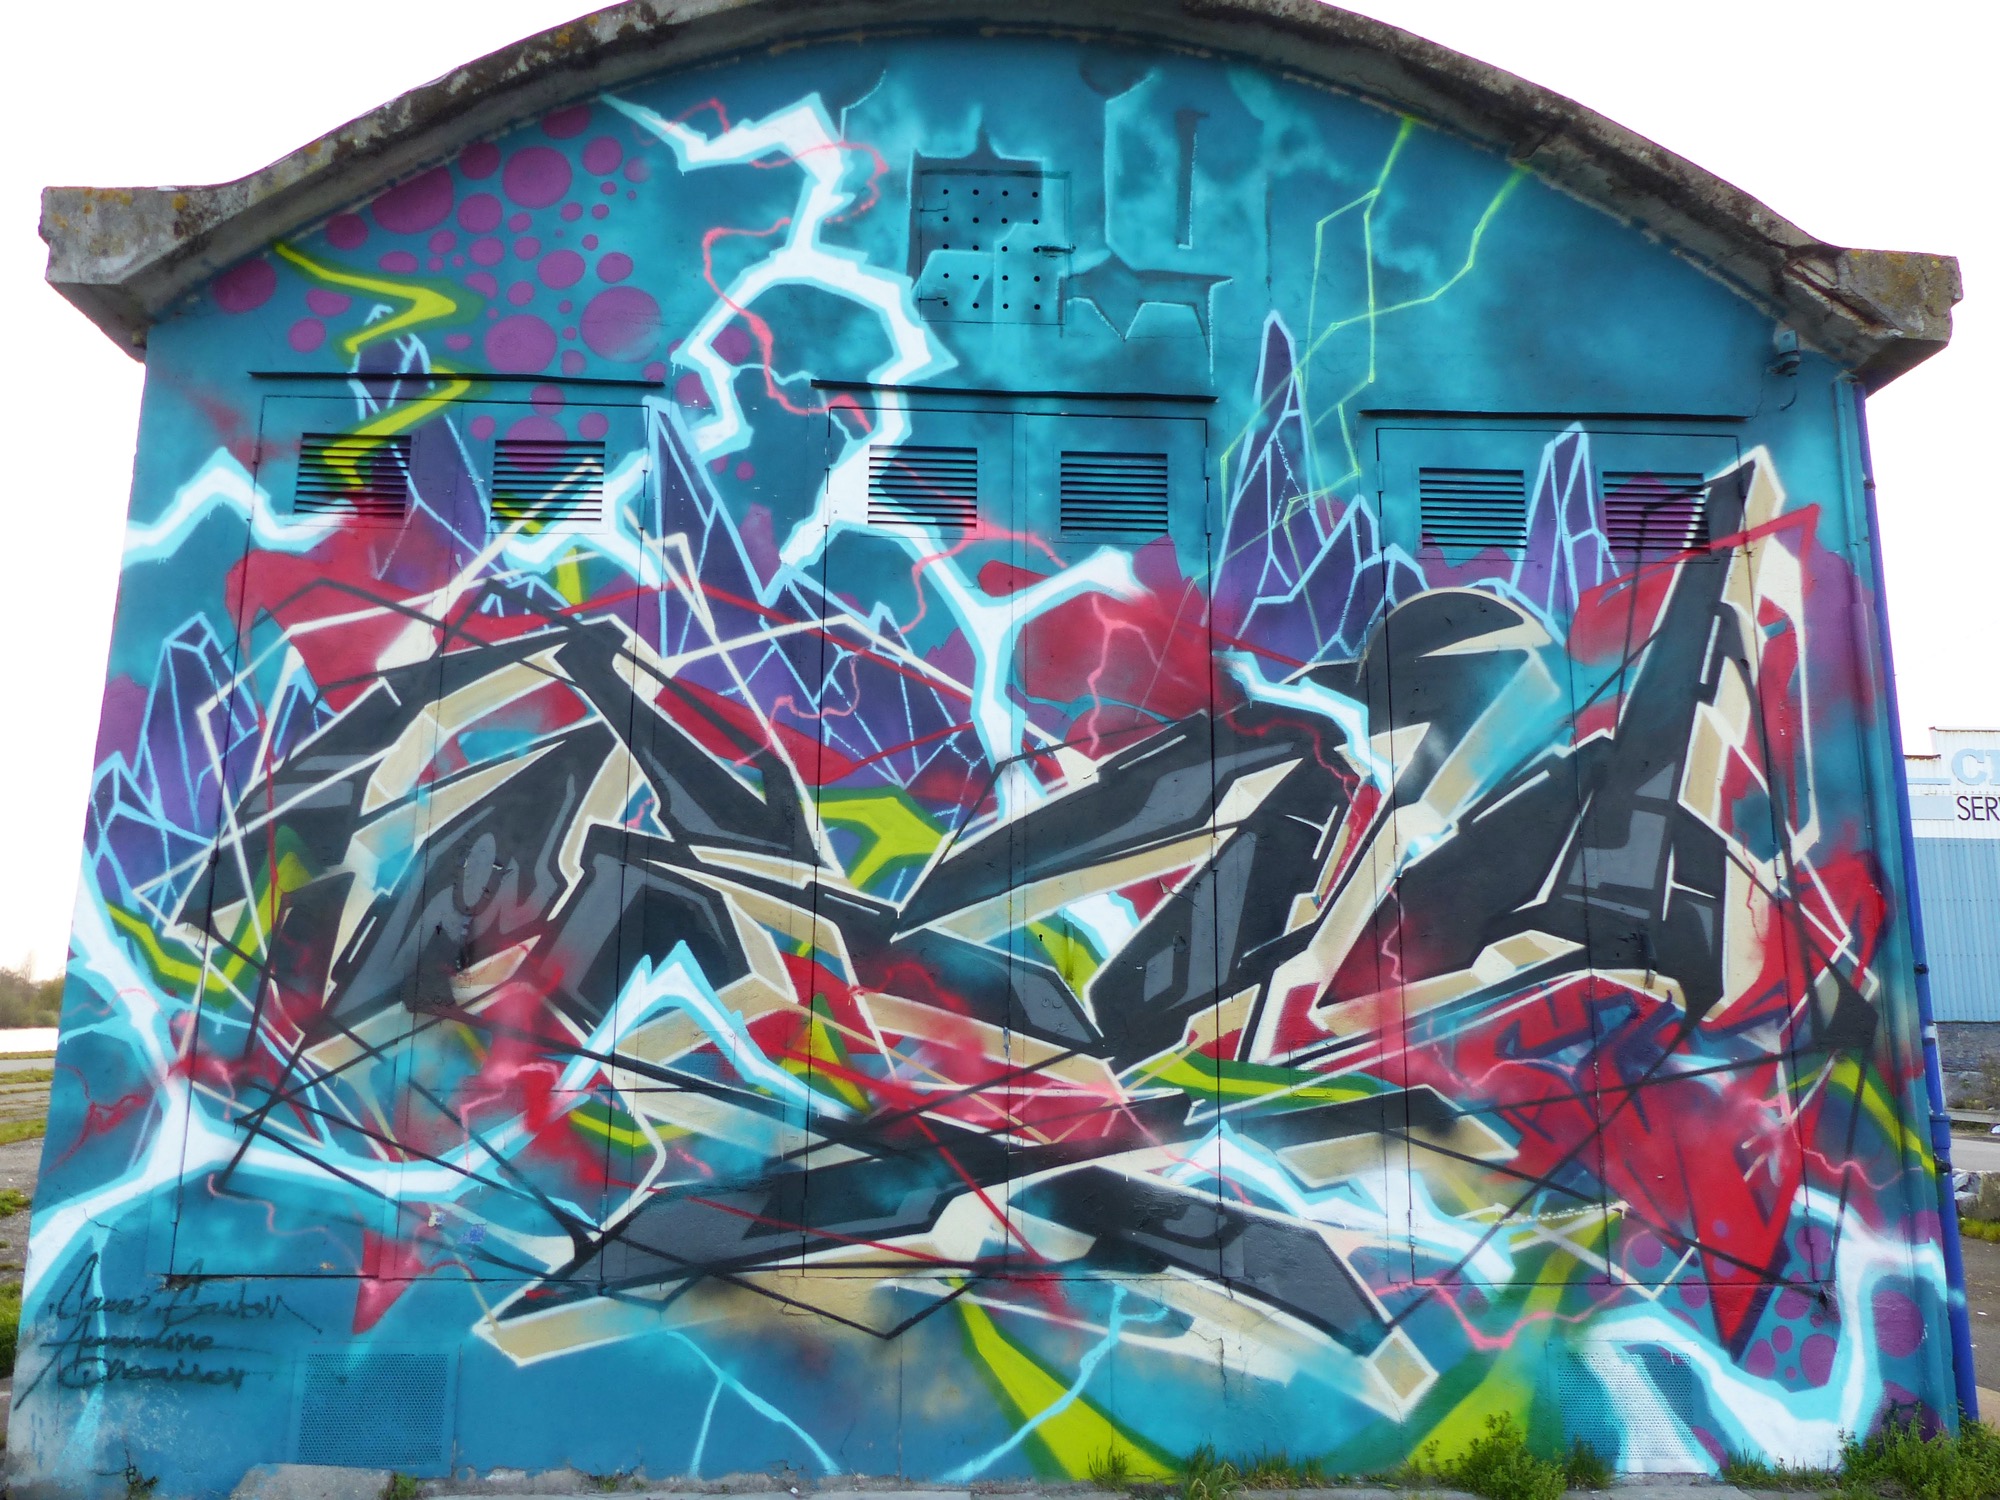 Graffiti 31  captured by Rabot in Nantes France